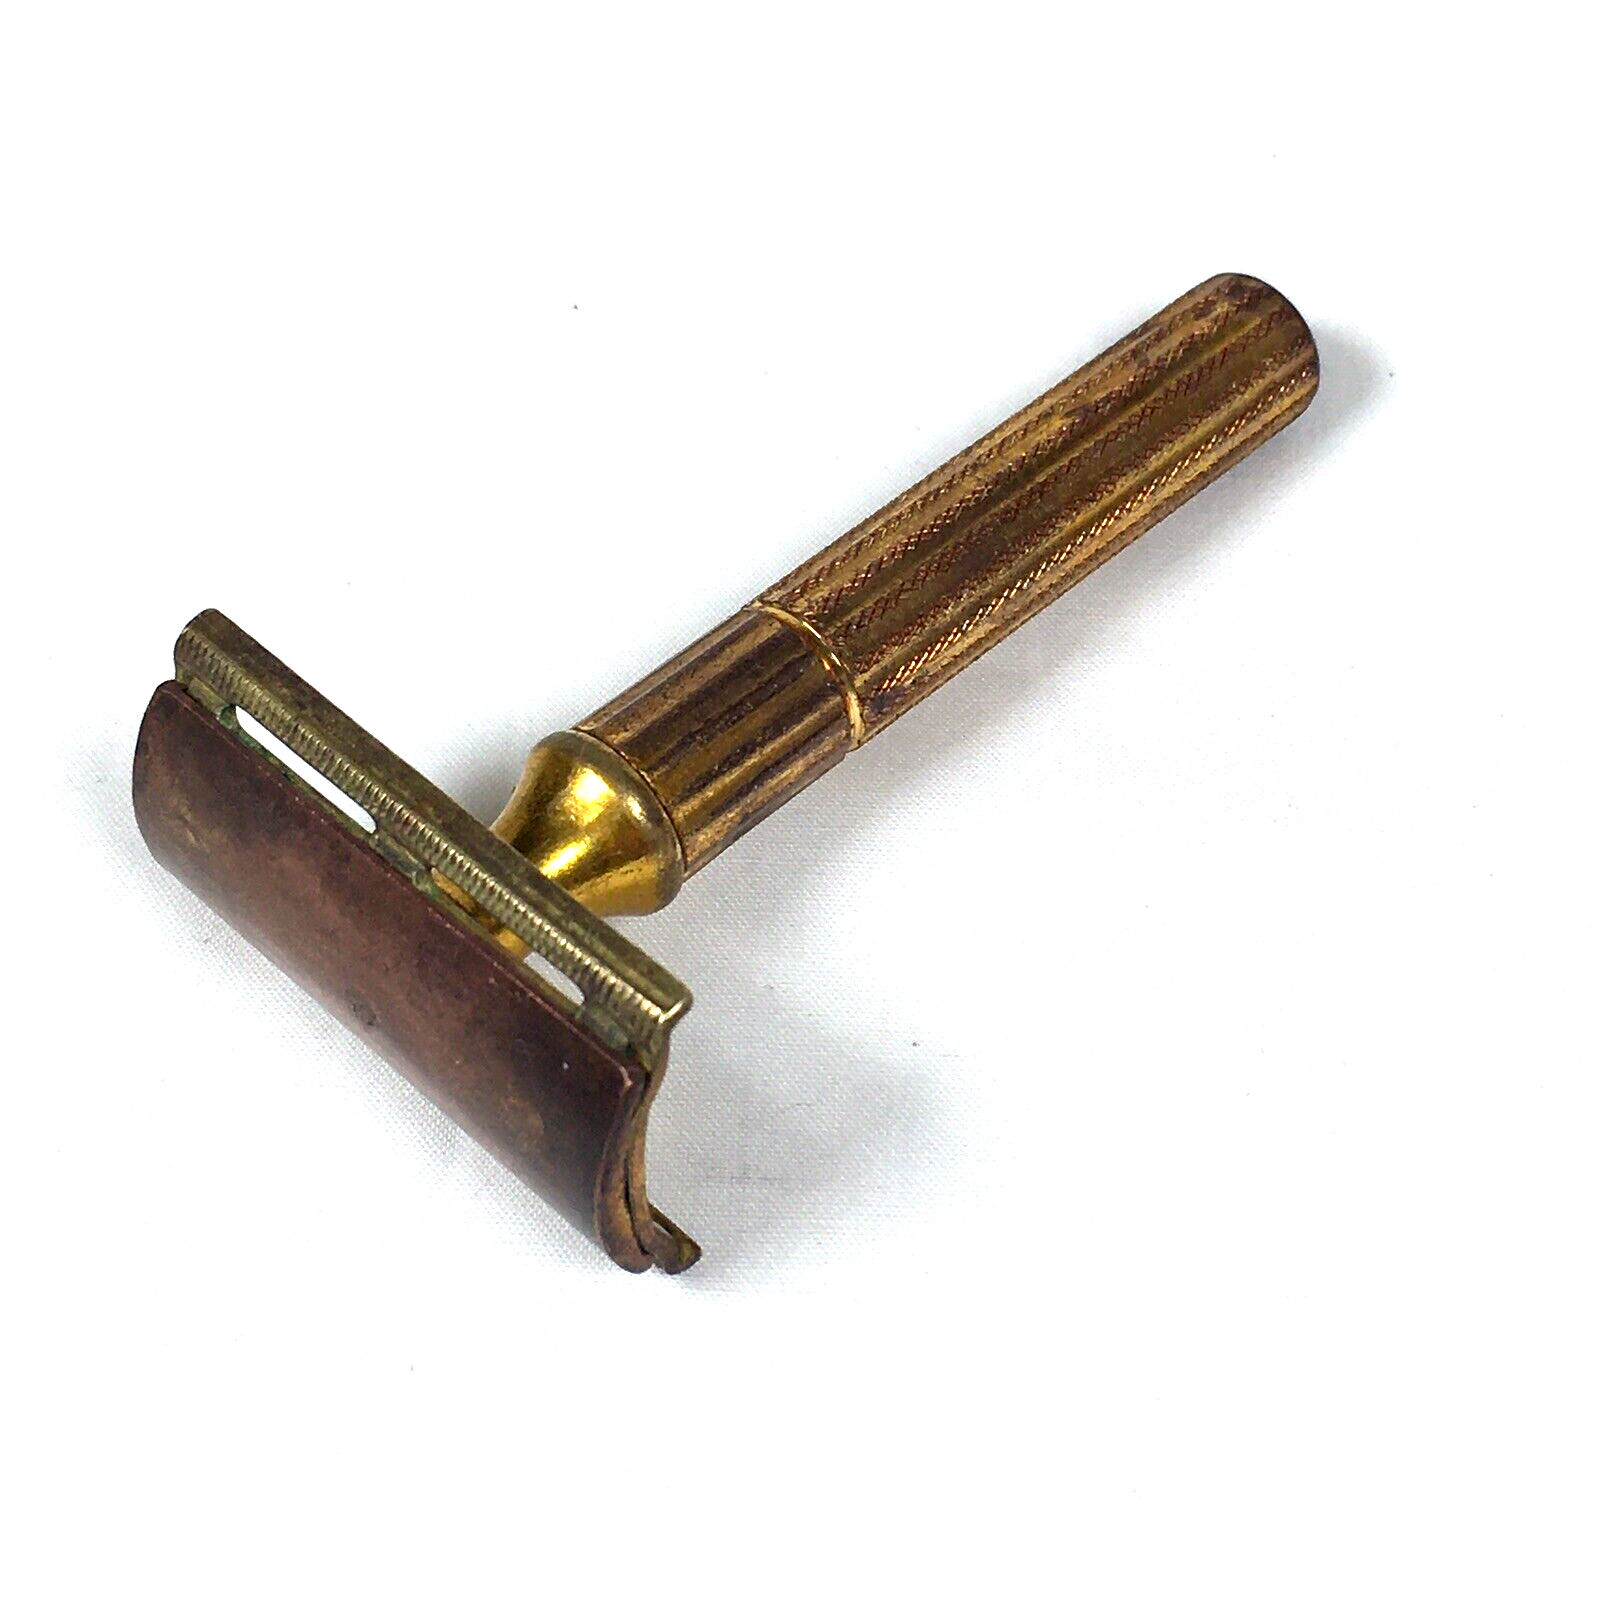 Gillette Gold Plated 3-Piece Safety Razor No Date Code 1946-1950 - $19.00